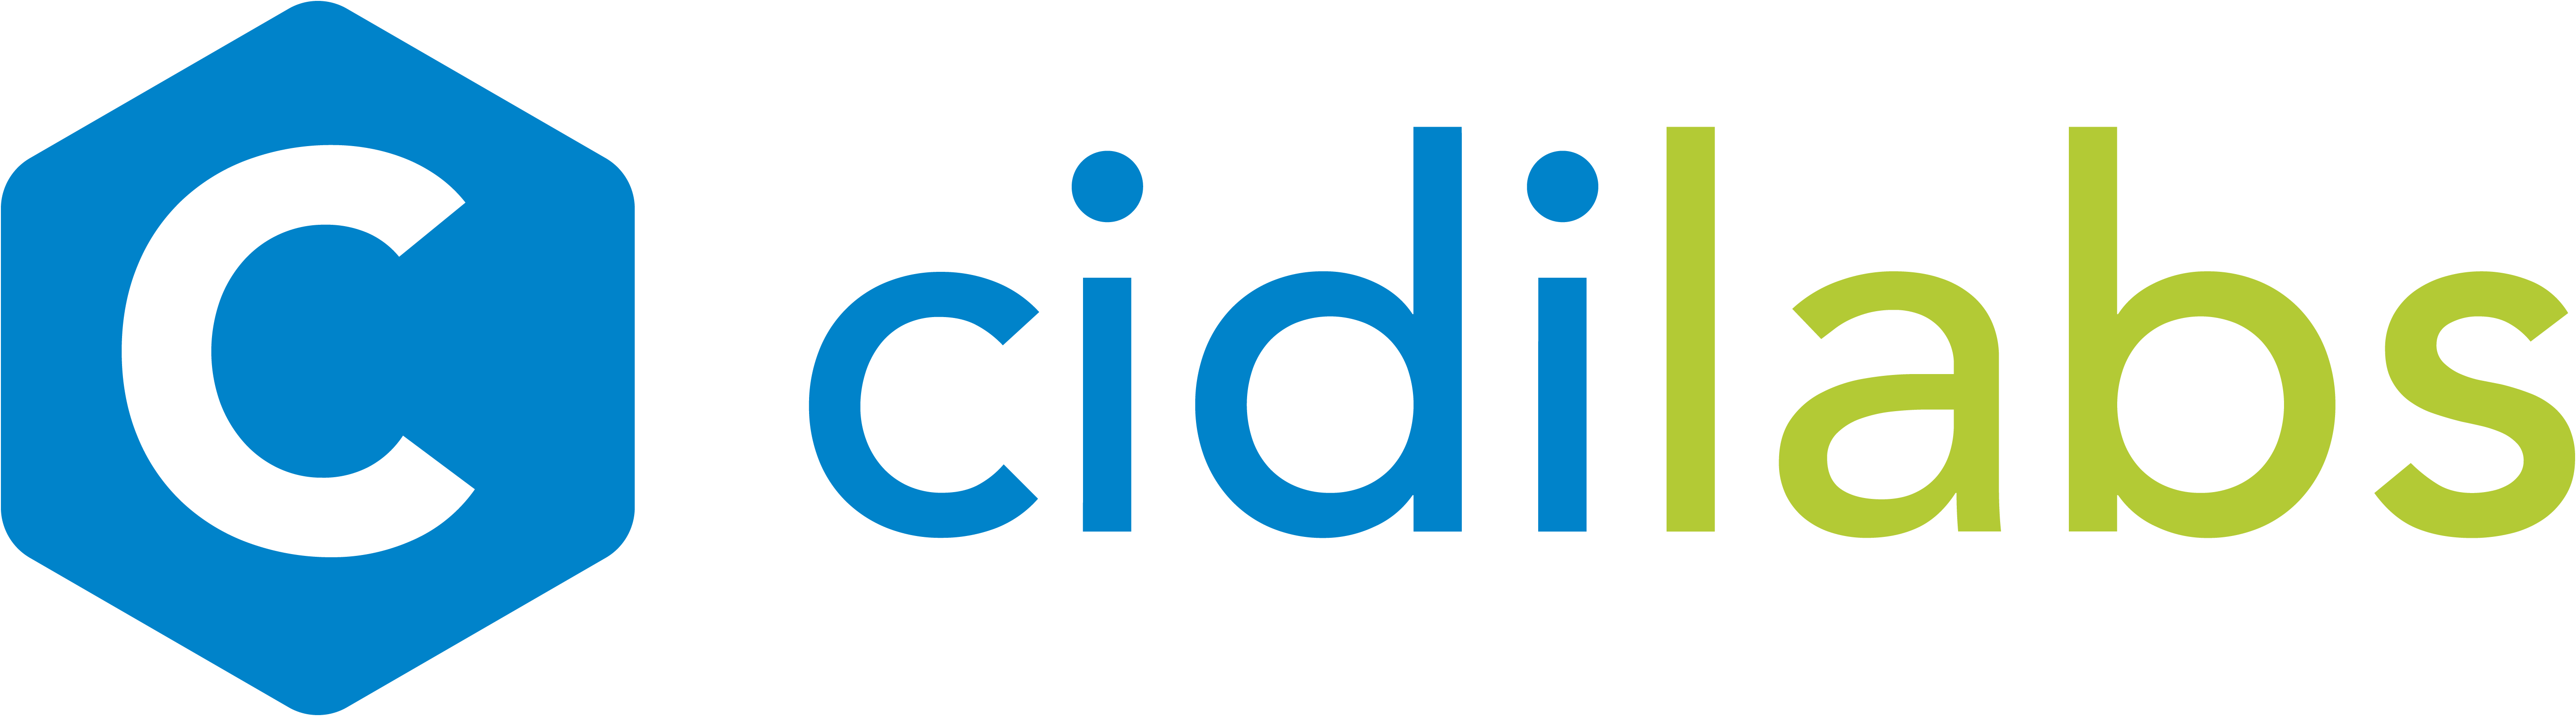 cidilabs written in blue and green font with "C" logo to the left in blue